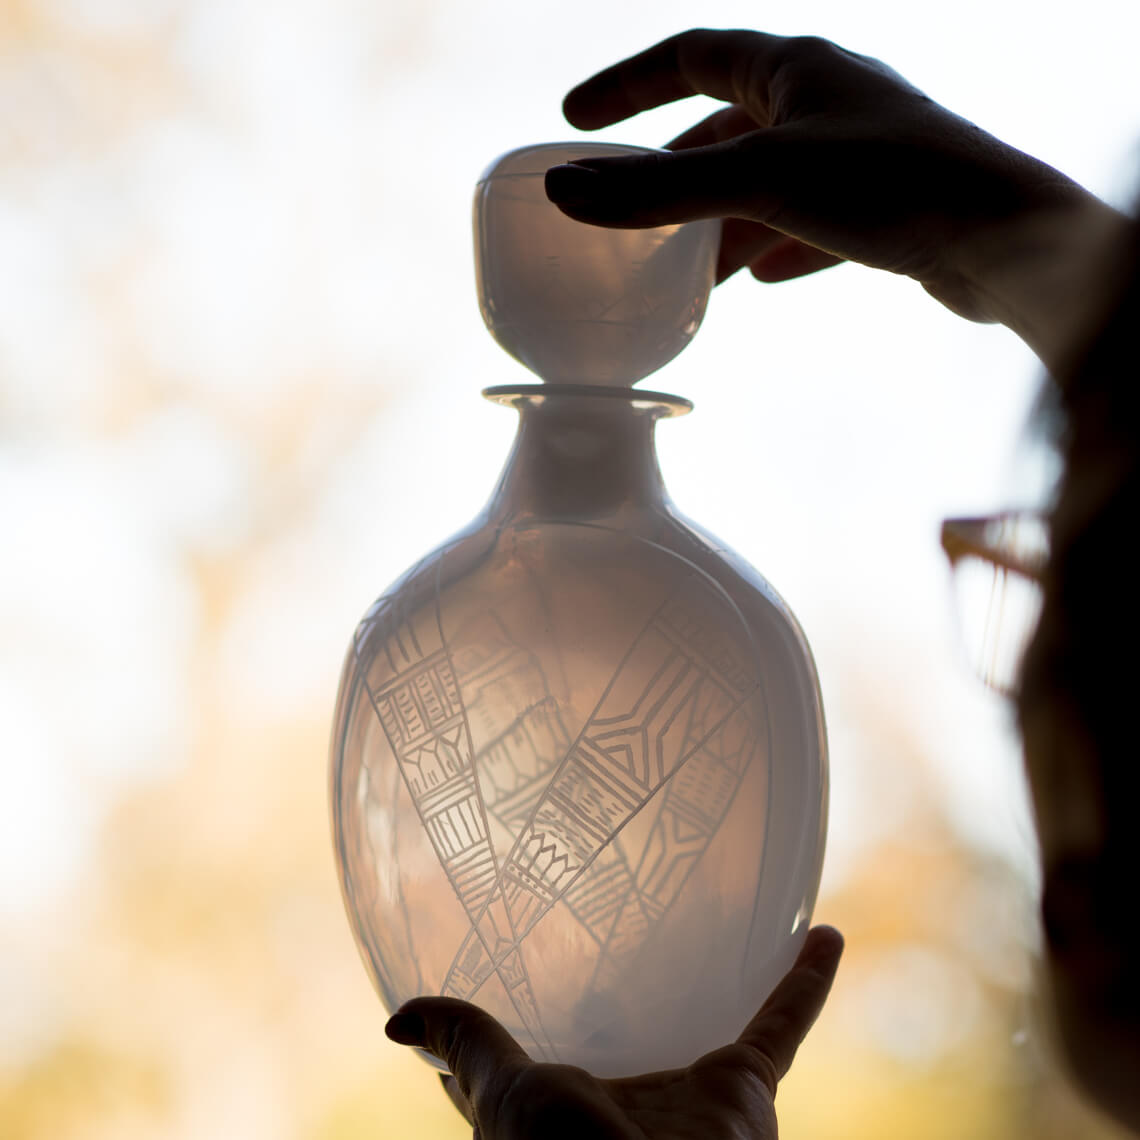 Translucent white glass decanter being held up to the light. The glass is engraved with geometric patterns